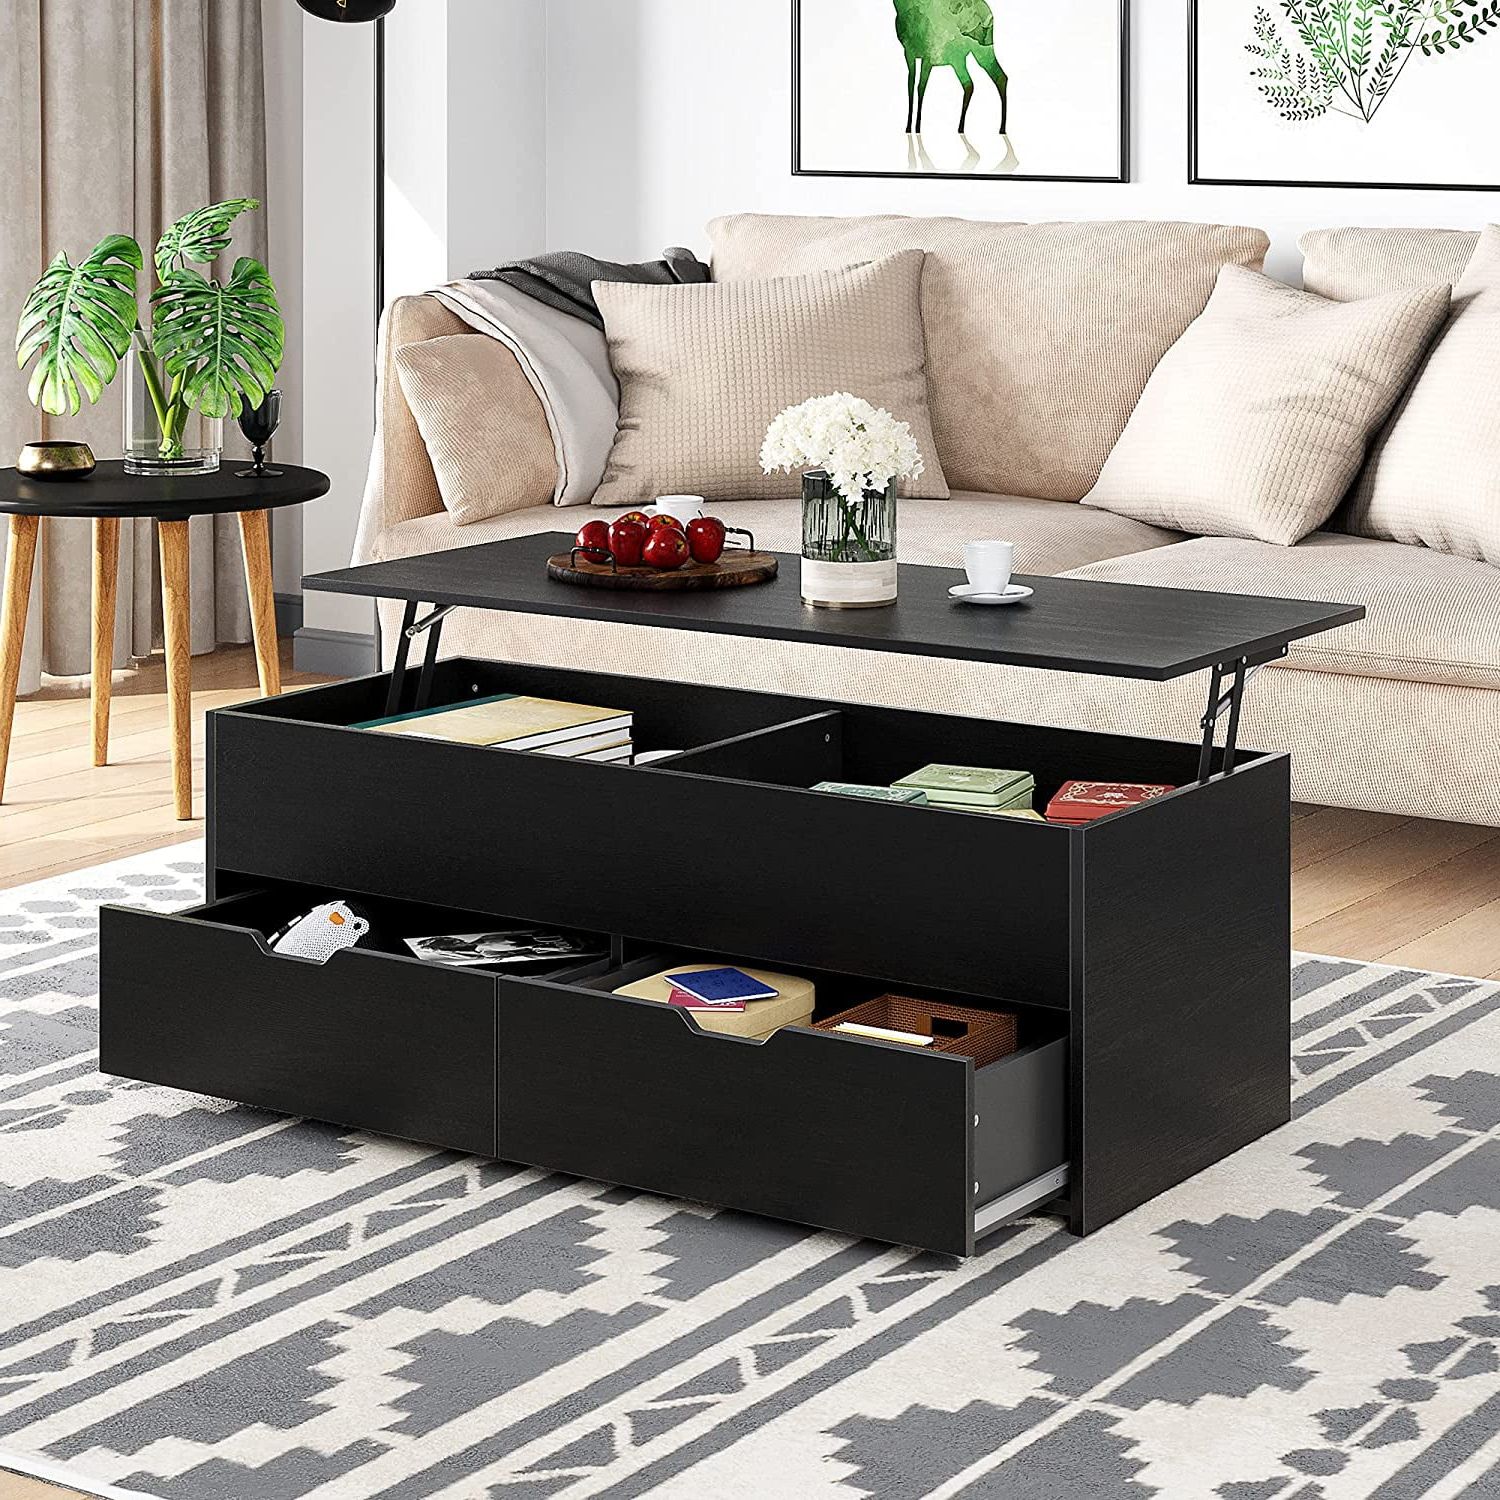 Current Lift Top Coffee Tables With Storage Drawers Within Homefort  (View 5 of 10)